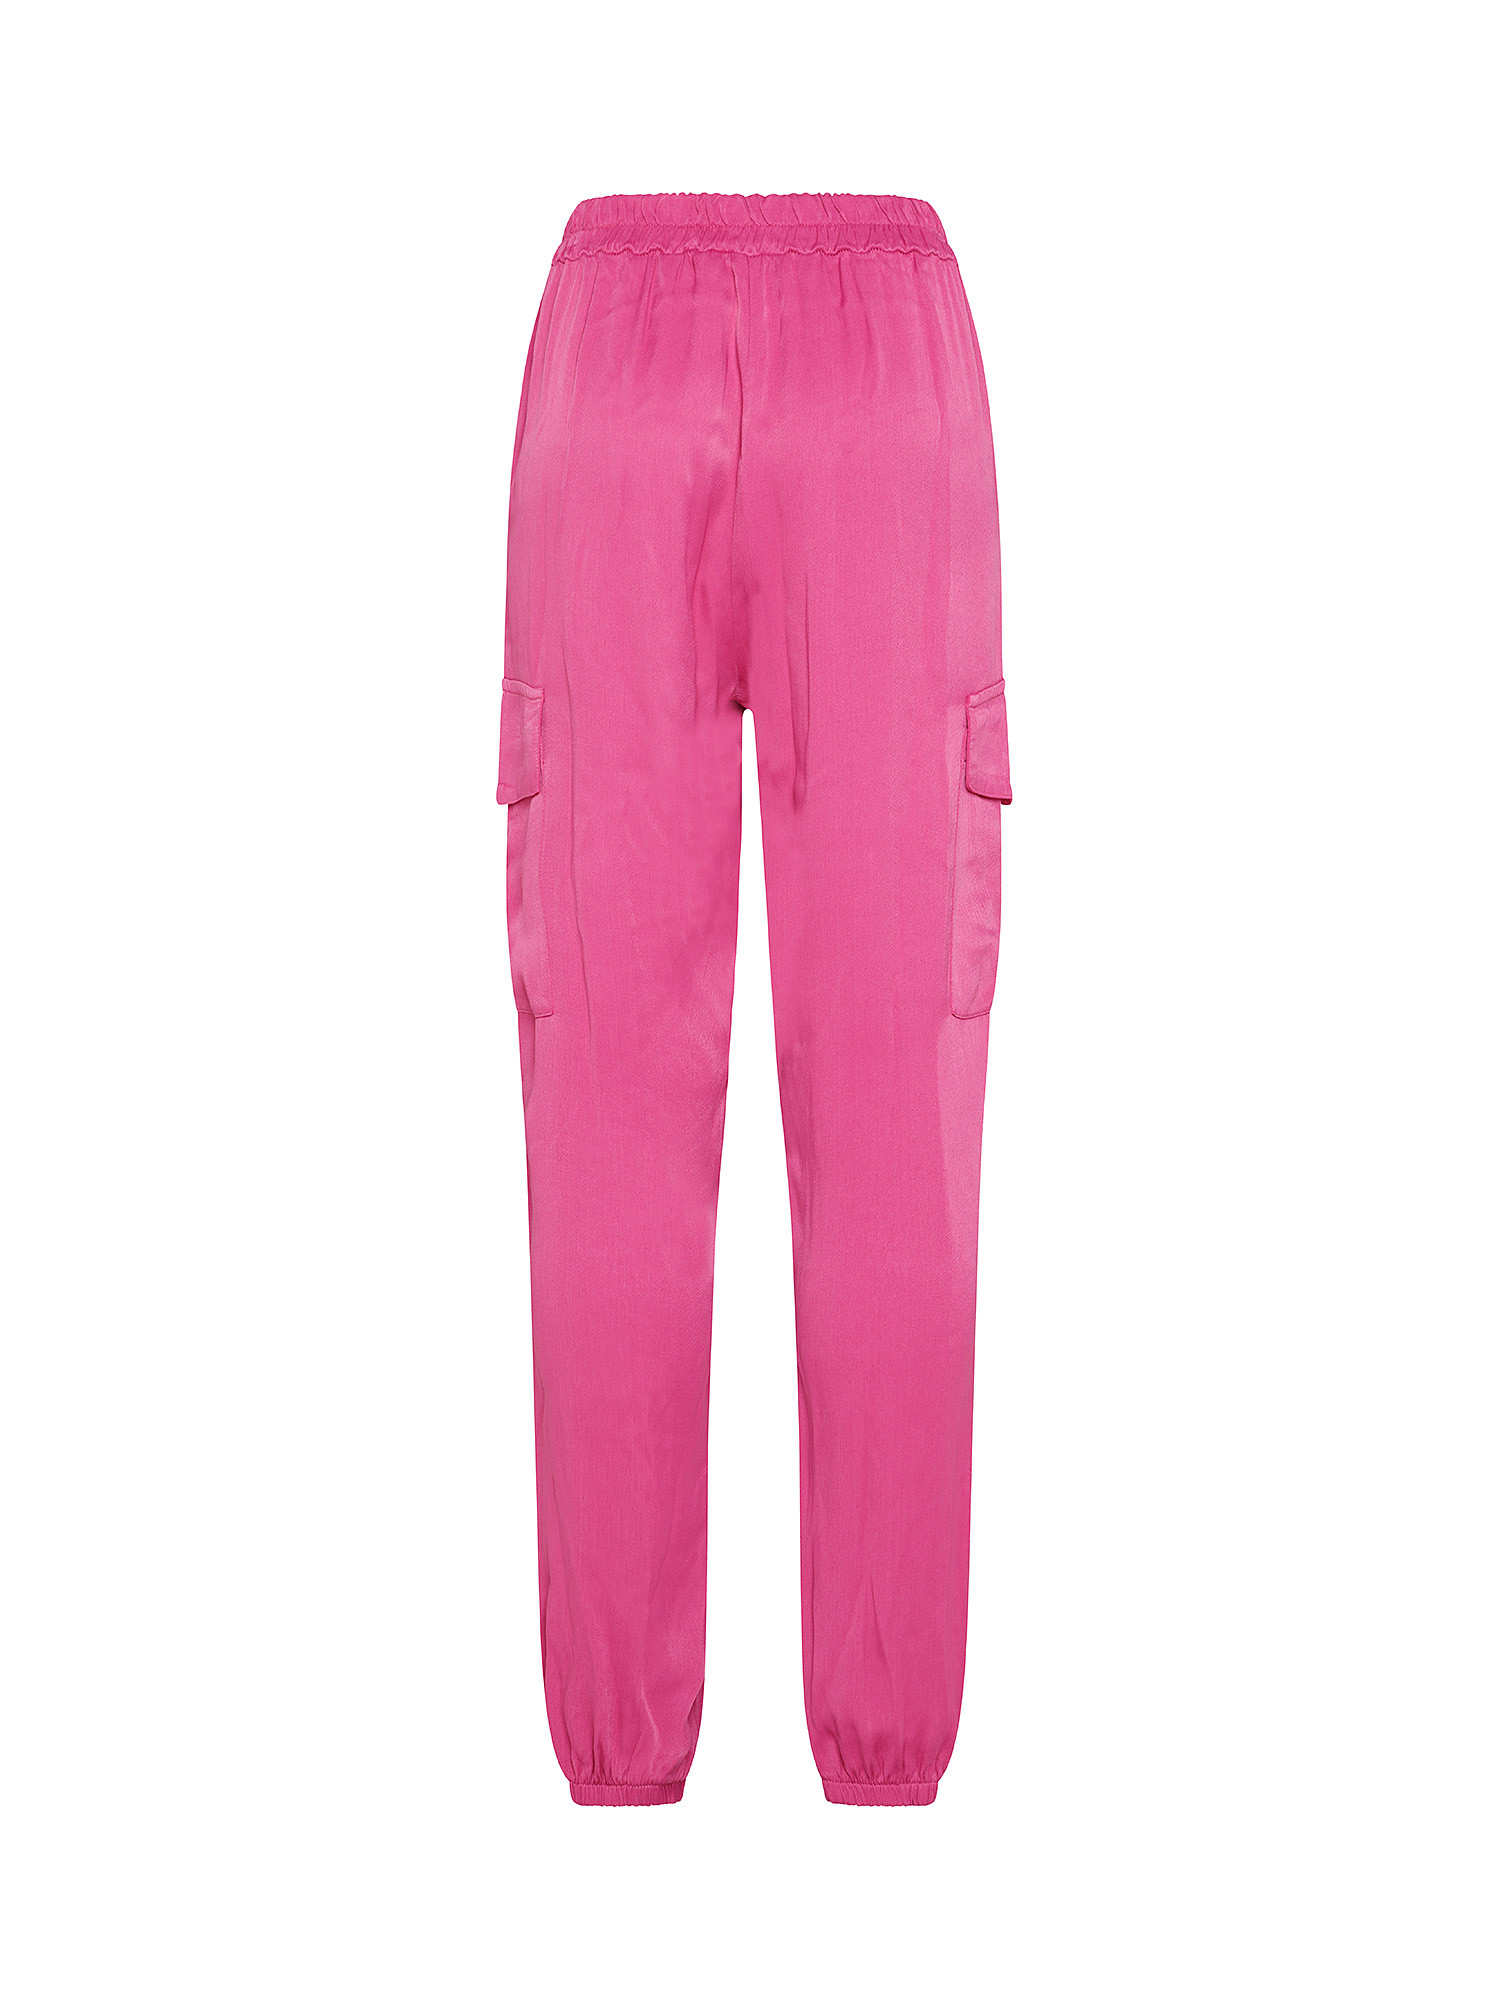 Cargo trousers, Pink Fuchsia, large image number 1